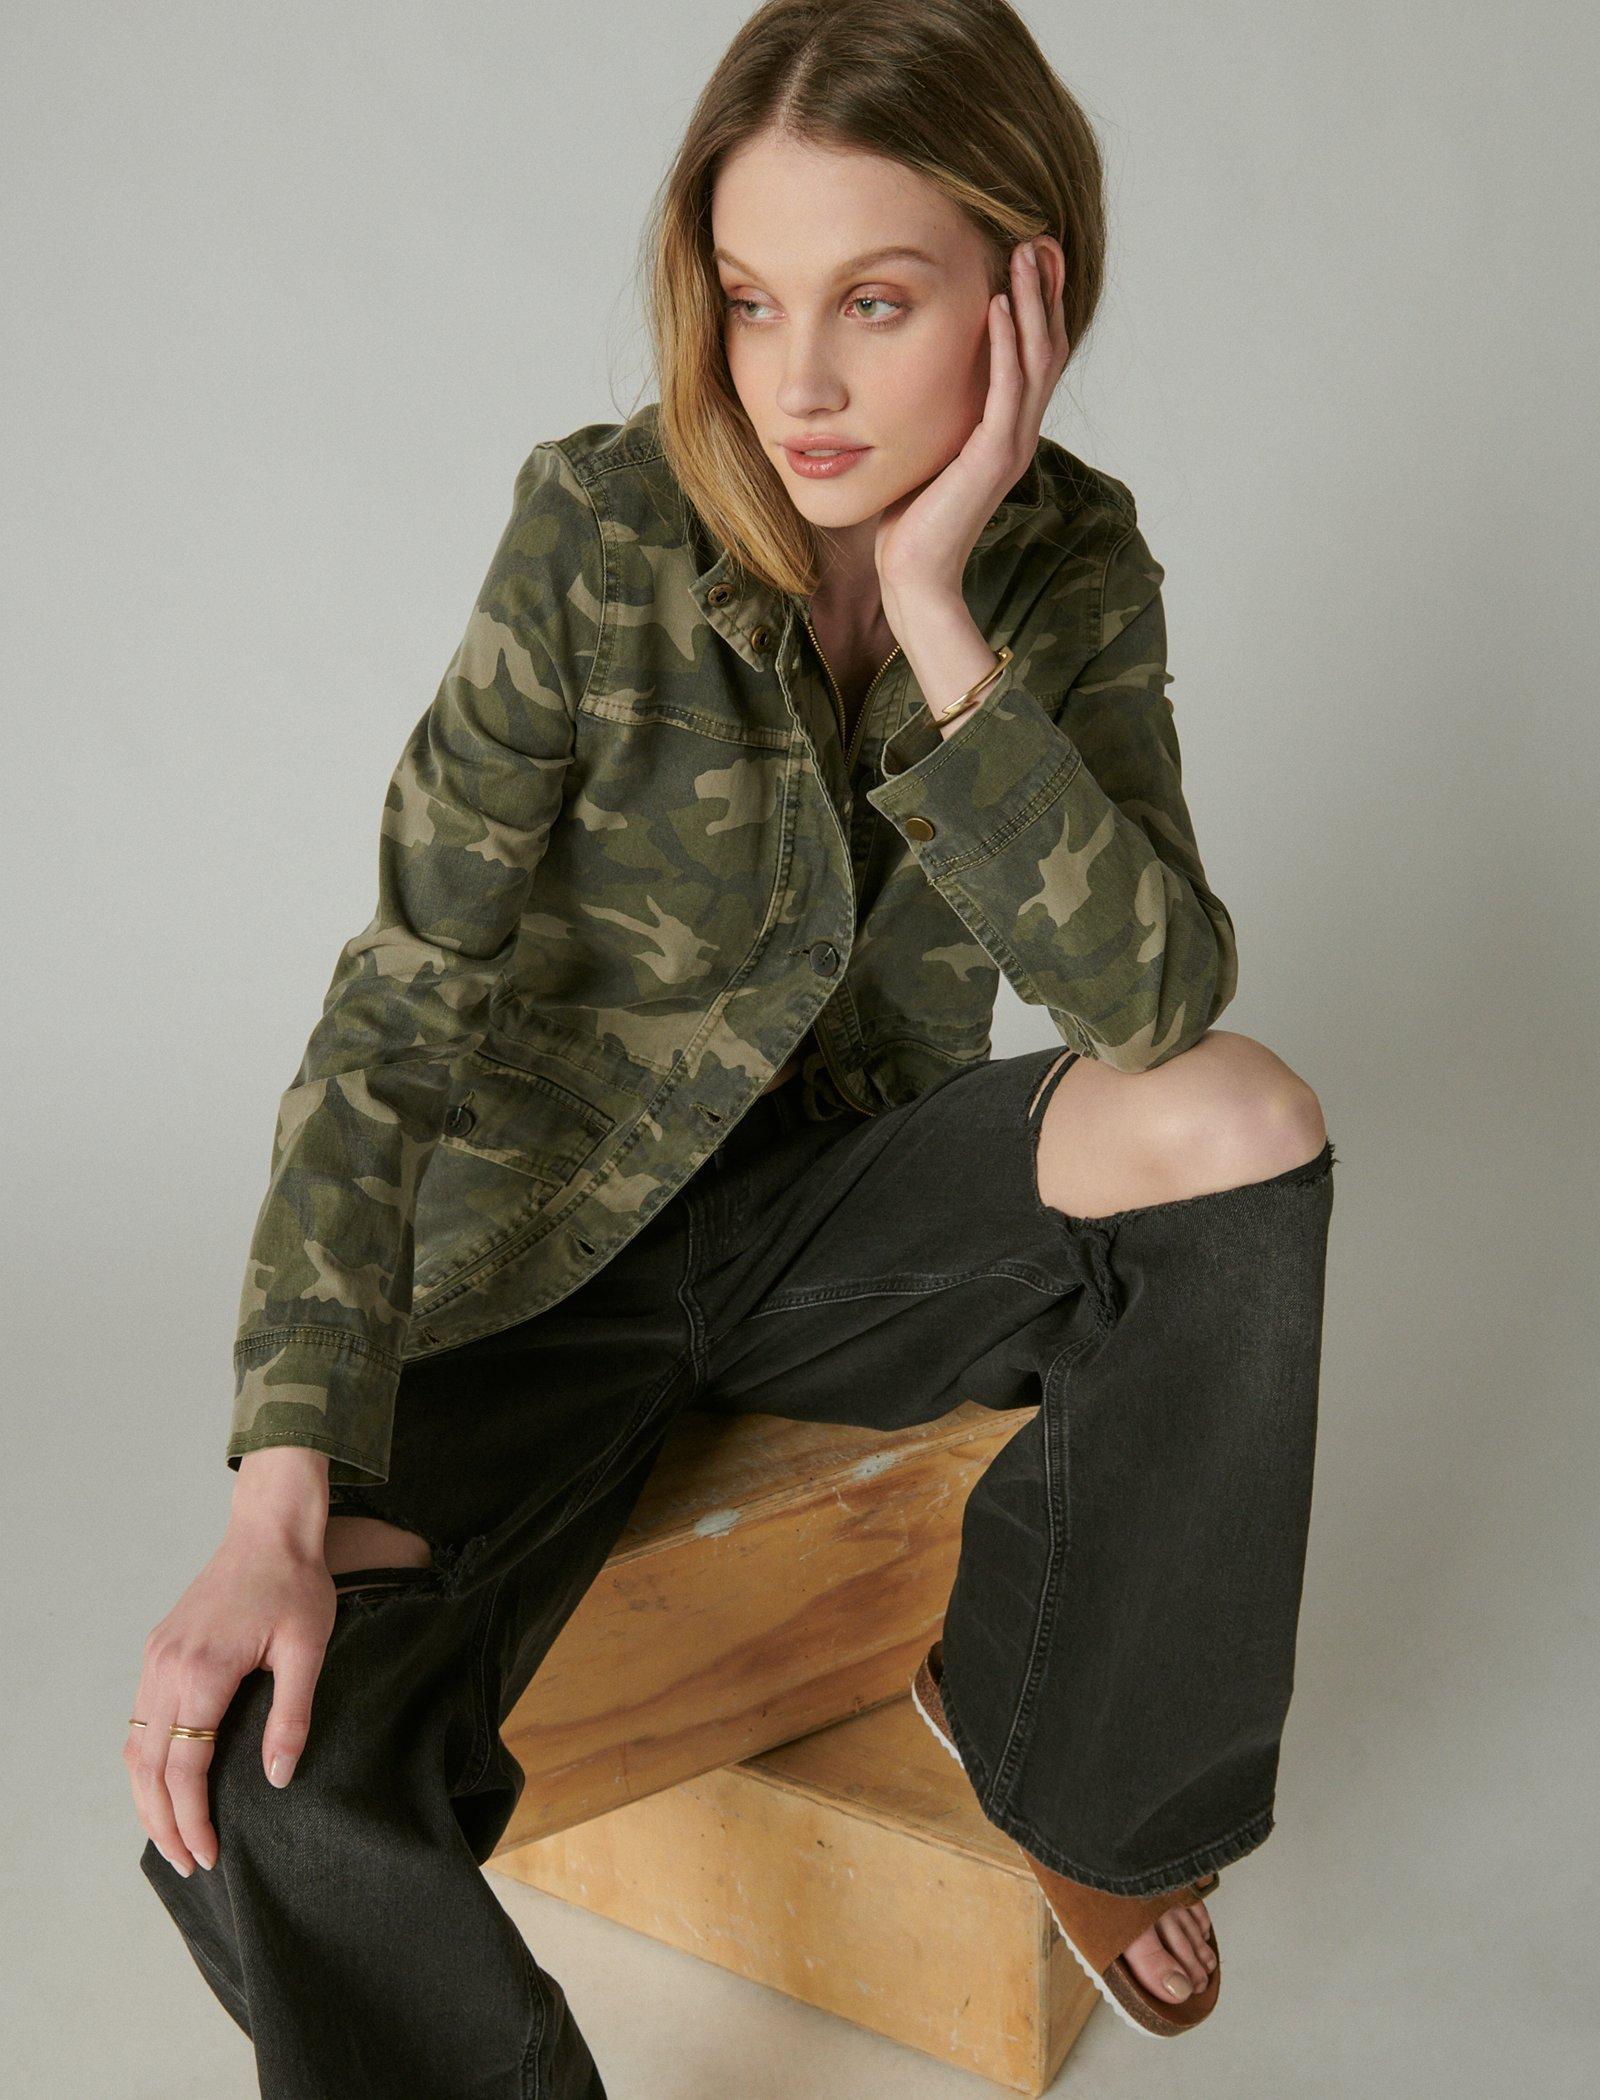 Buy CAMO PRINTED UTILITY JACKET for USD 74.99